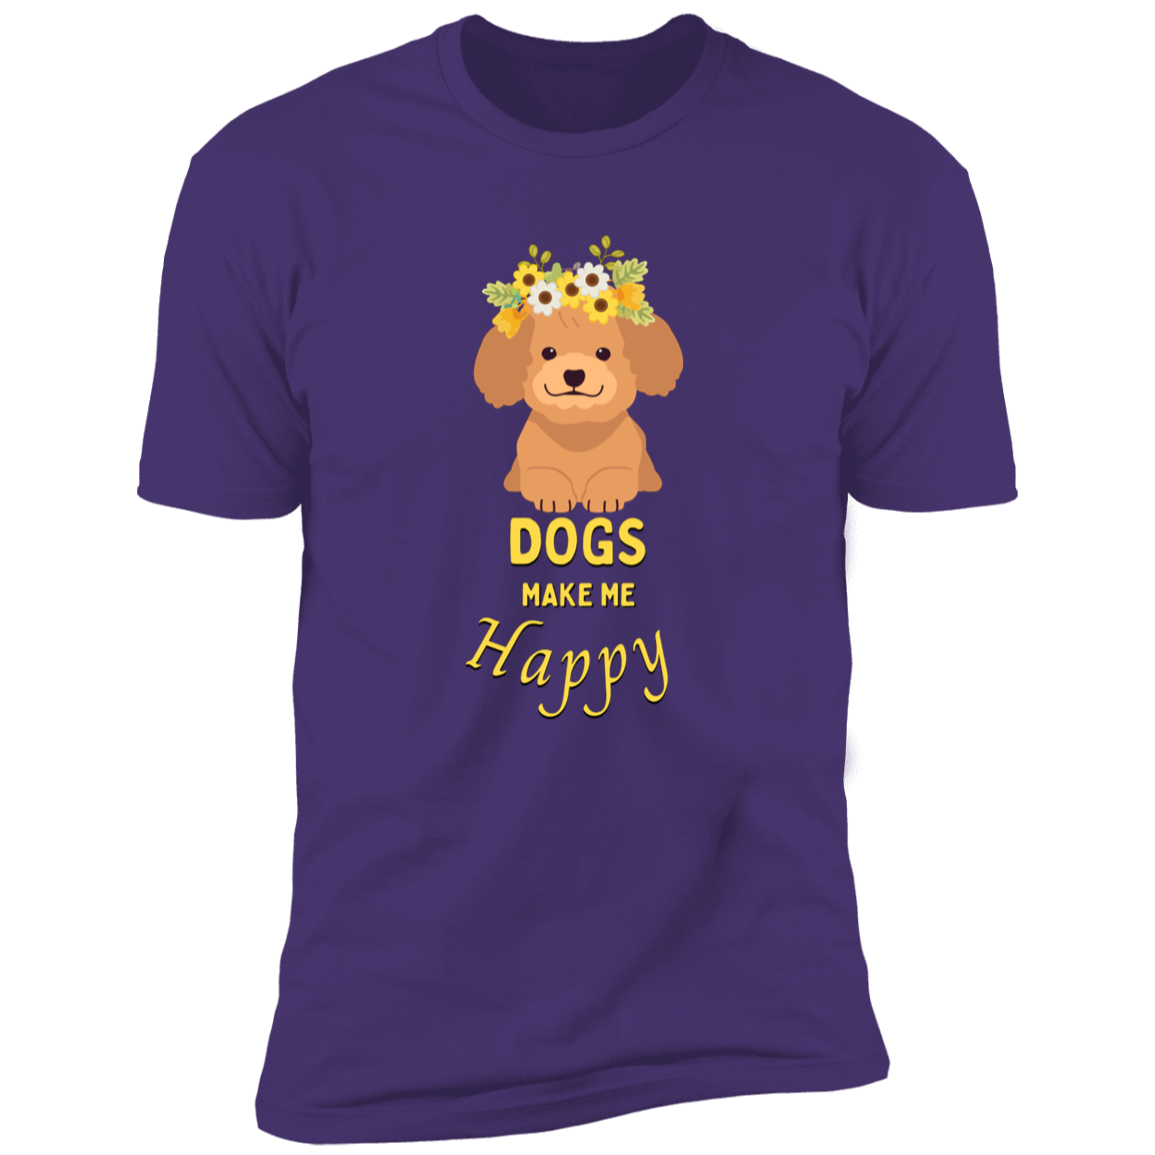 Dogs Make Me Happy t-shirt, funny dog shirt for humans, in purple rush